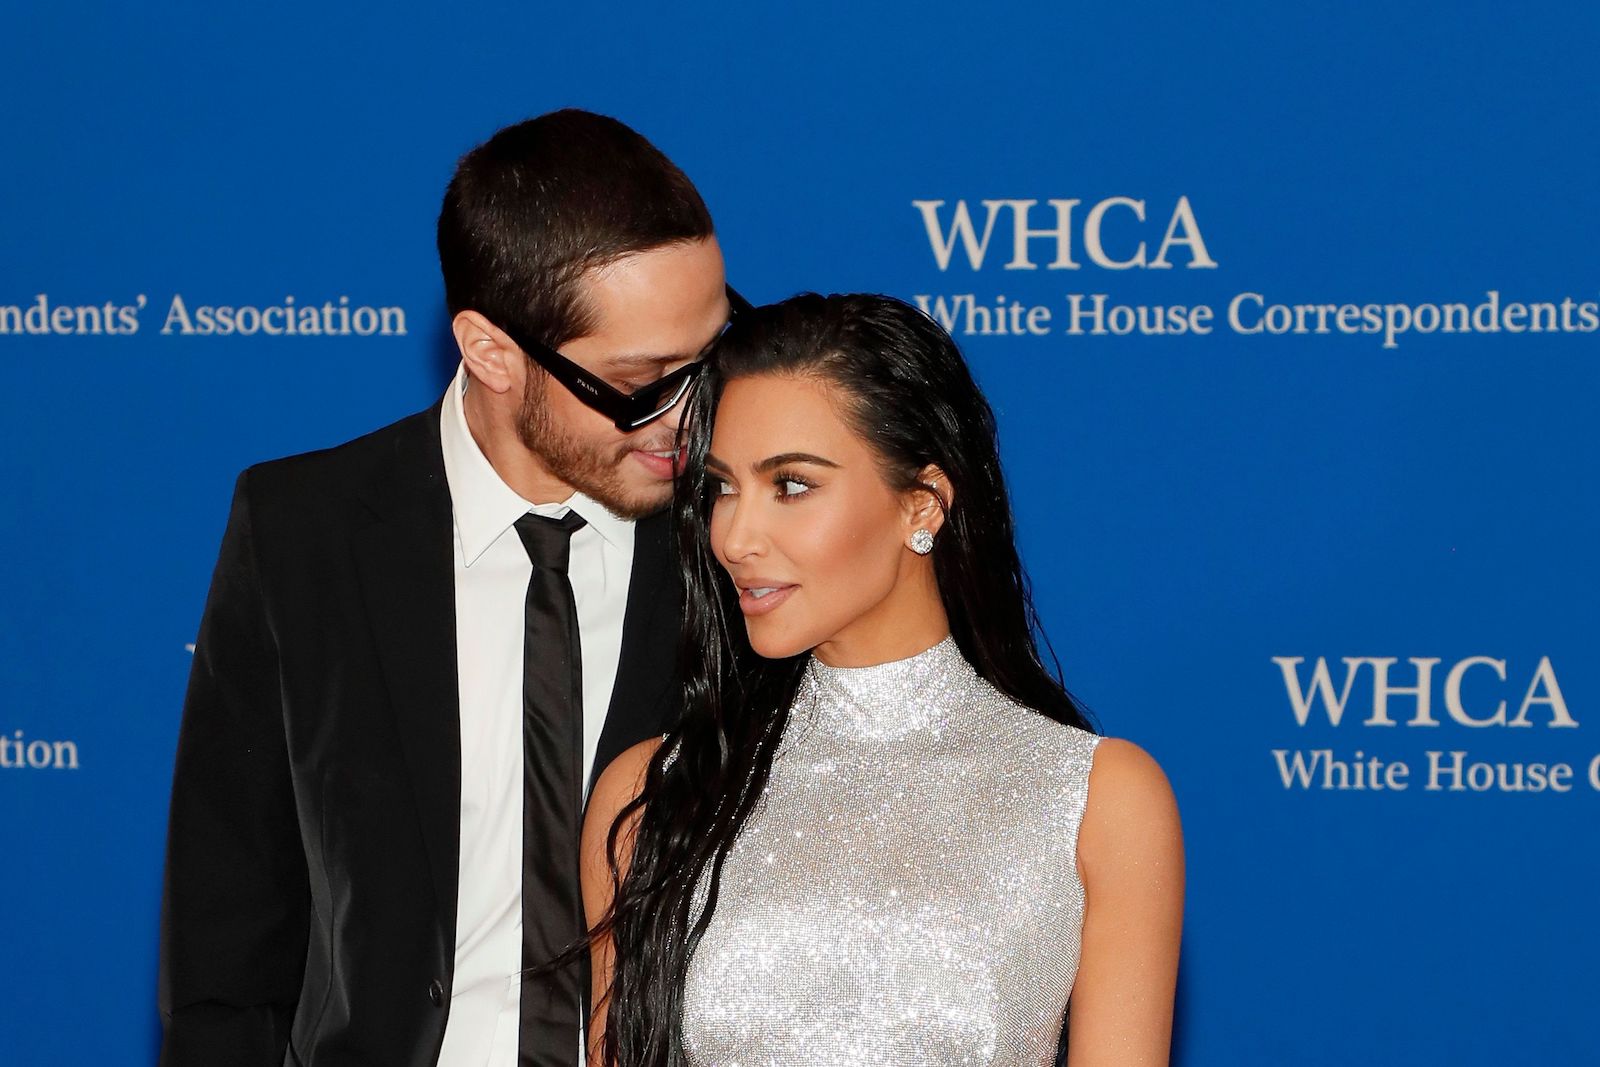 Pete Davidson and Kim Kardashian attended the 2022 White House Correspondents' Association Dinner and he smiles while looking at her